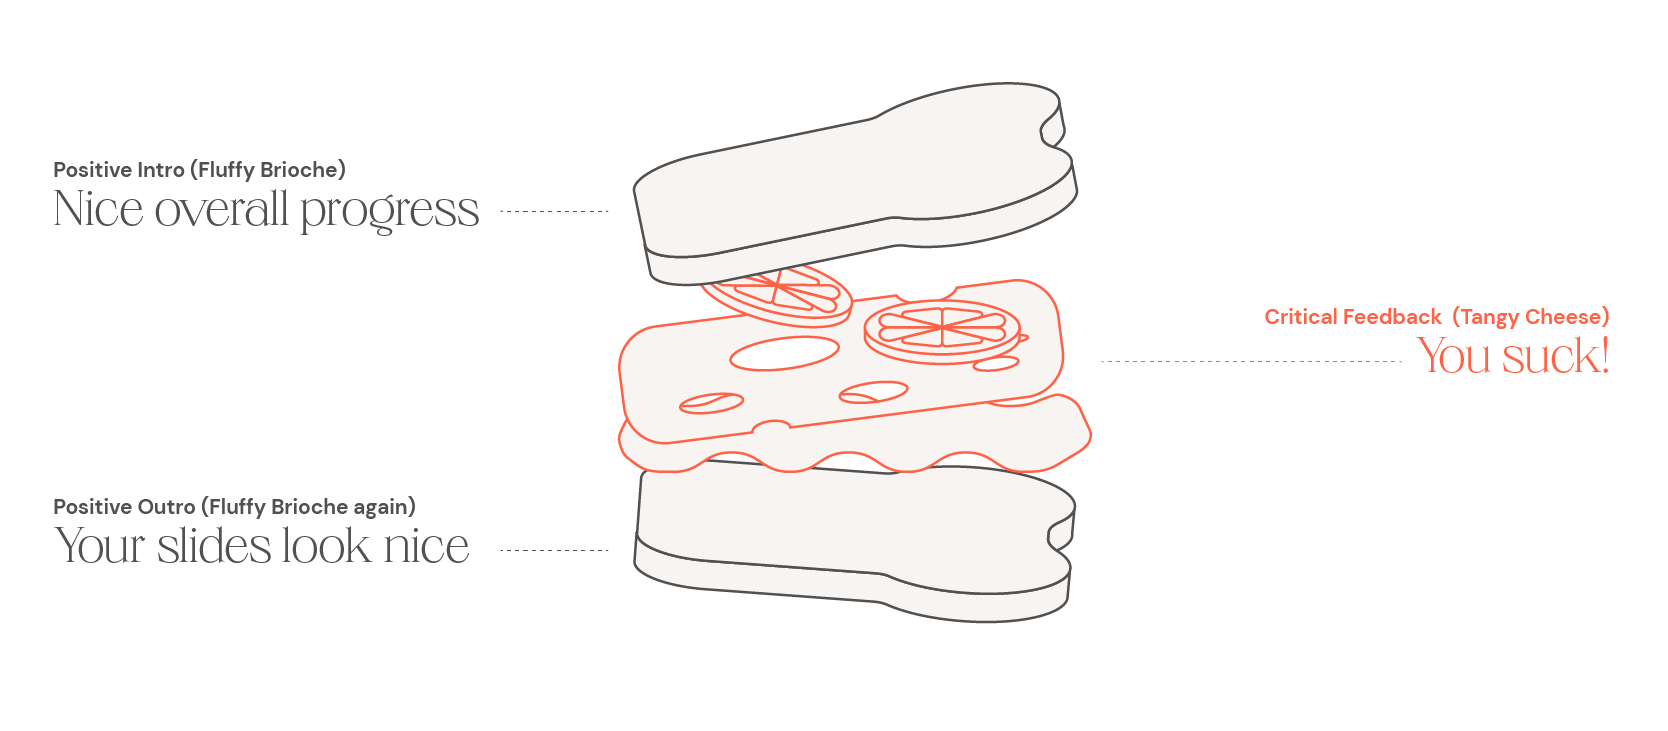 Illustration of a cheese sandwich